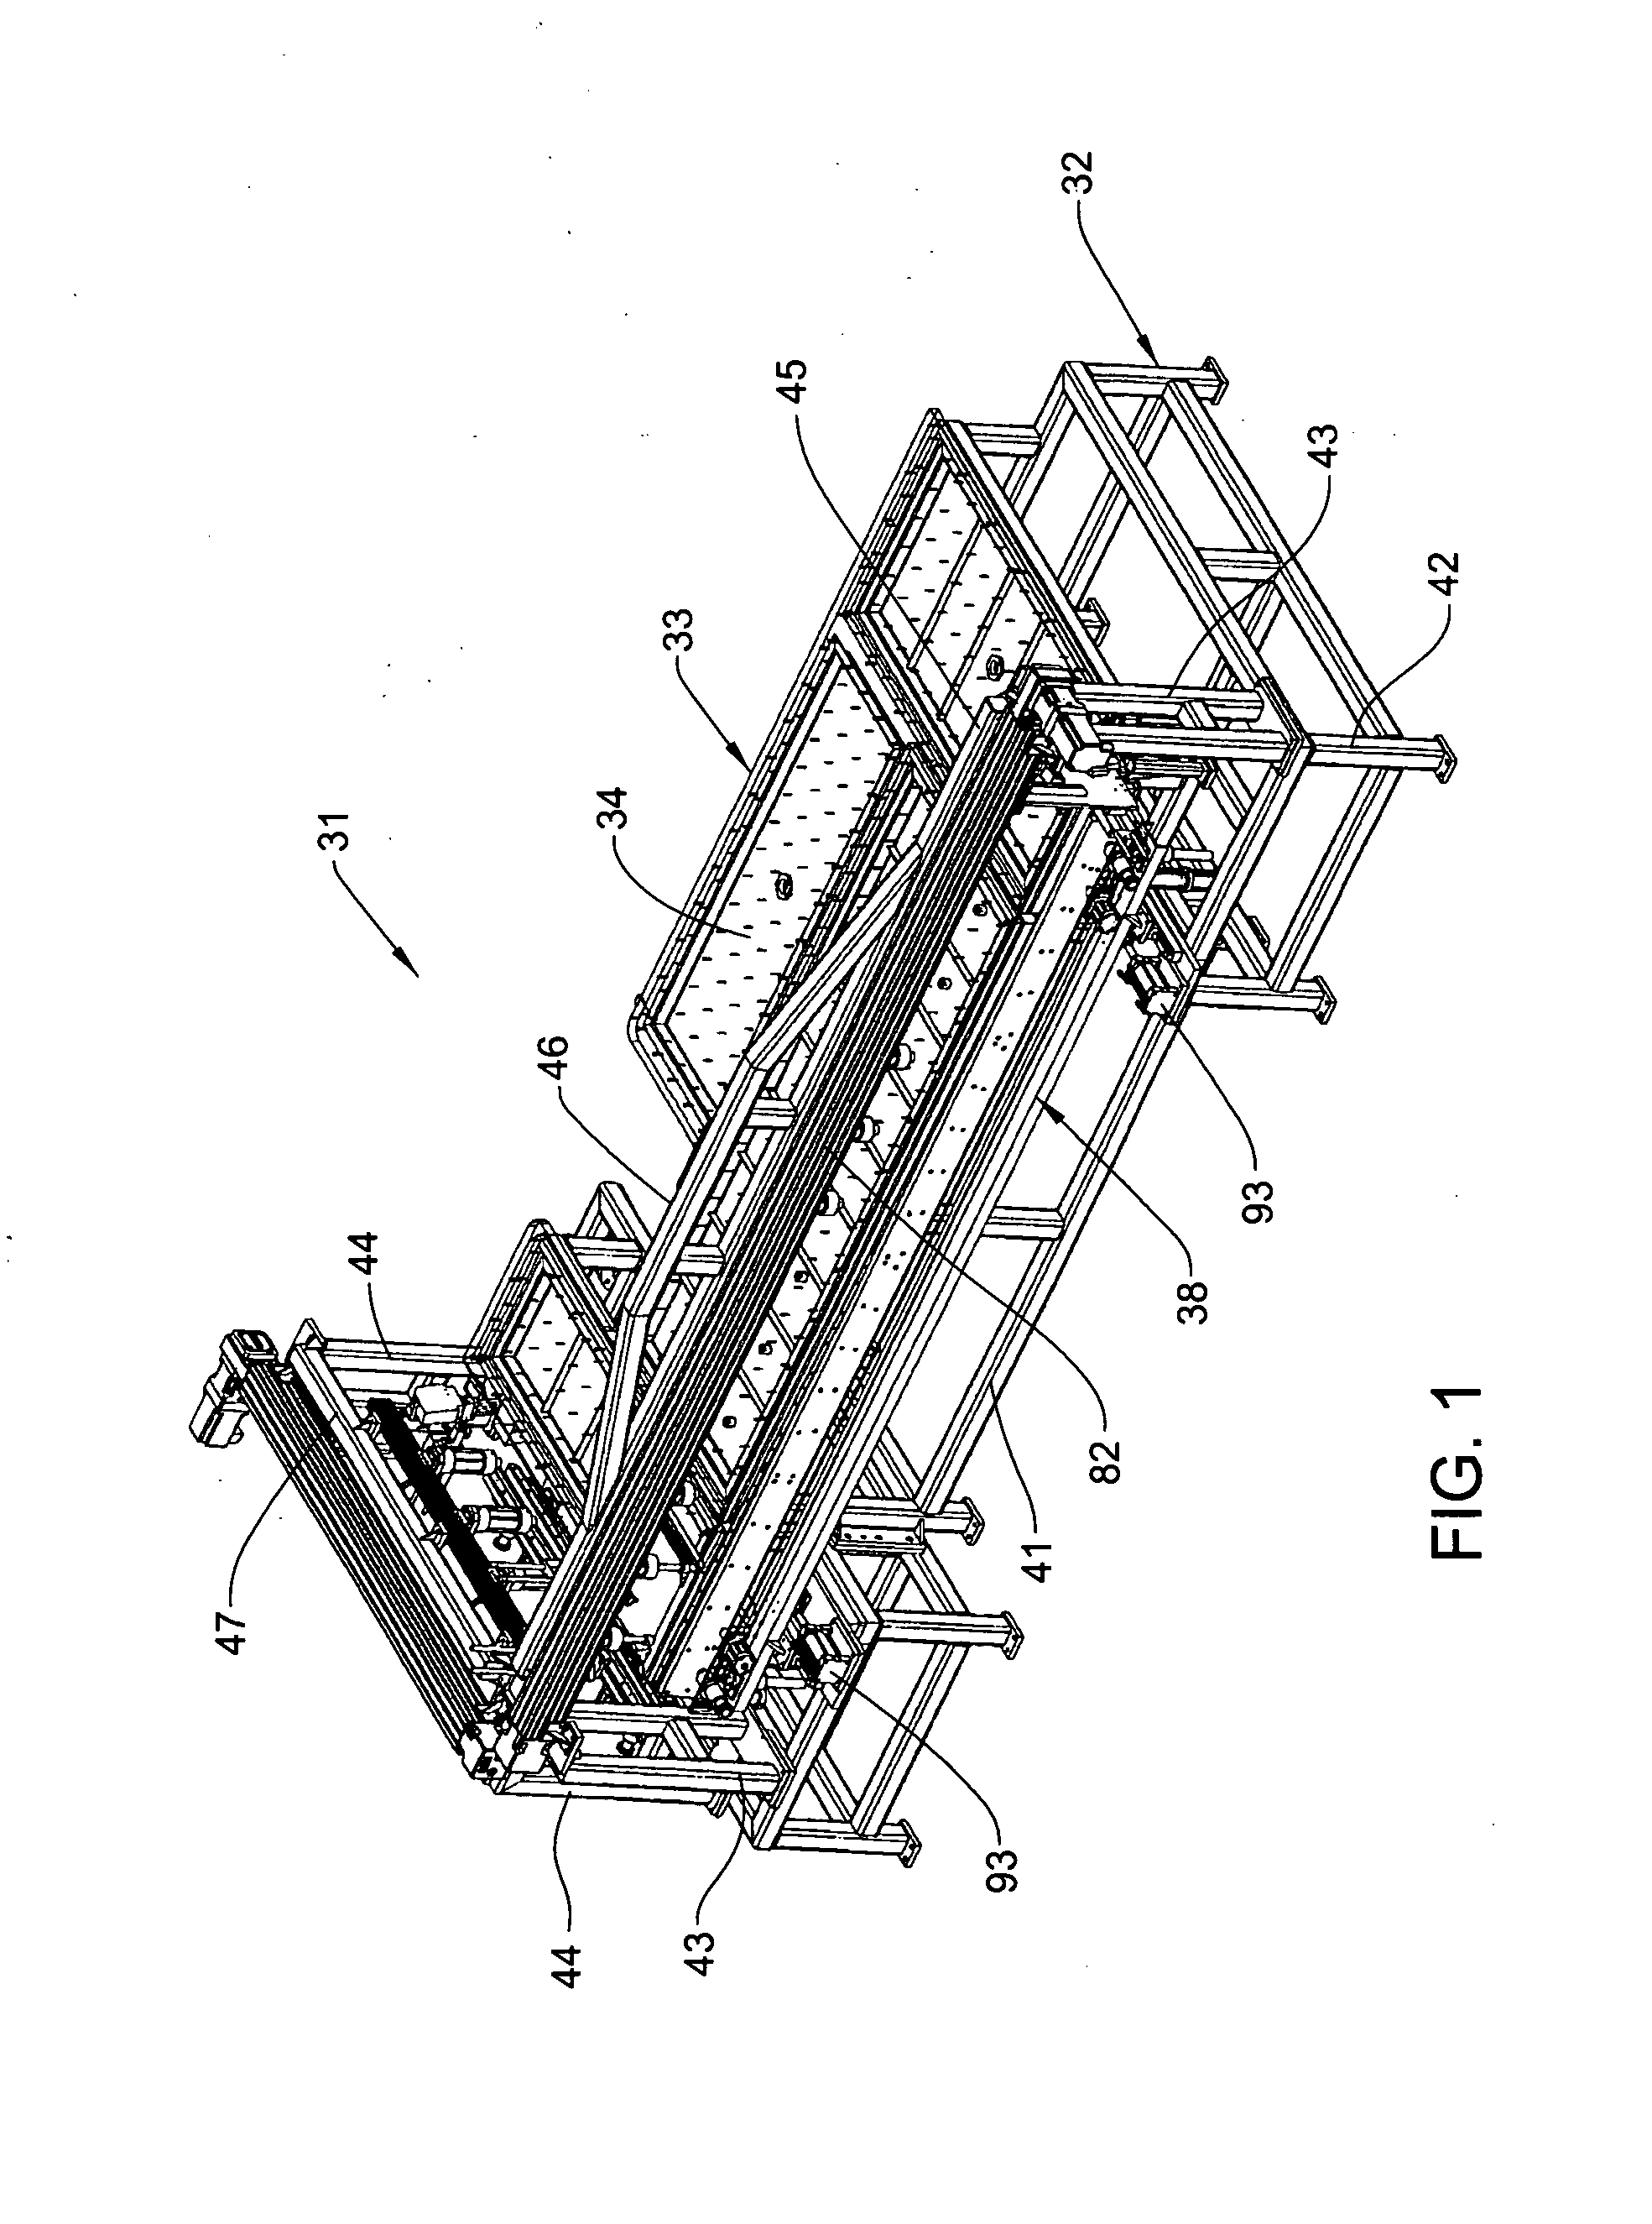 Apparatus and process for wrapping and securing edge flaps of flexible cover sheet to panel structure